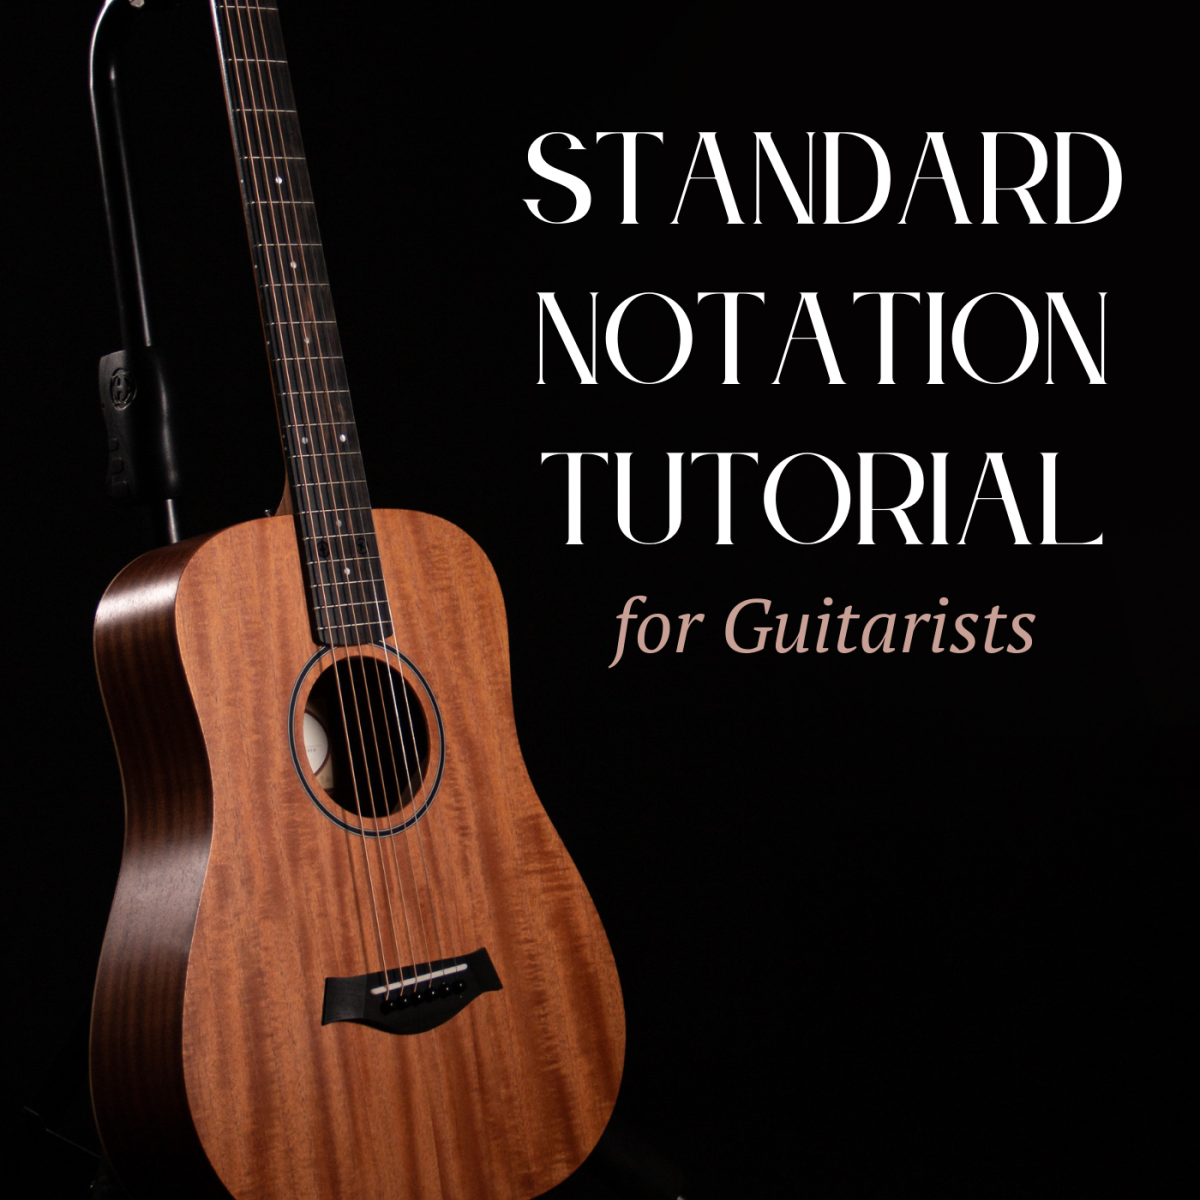 Follow along with this tutorial to learn about standard music notation for guitar.